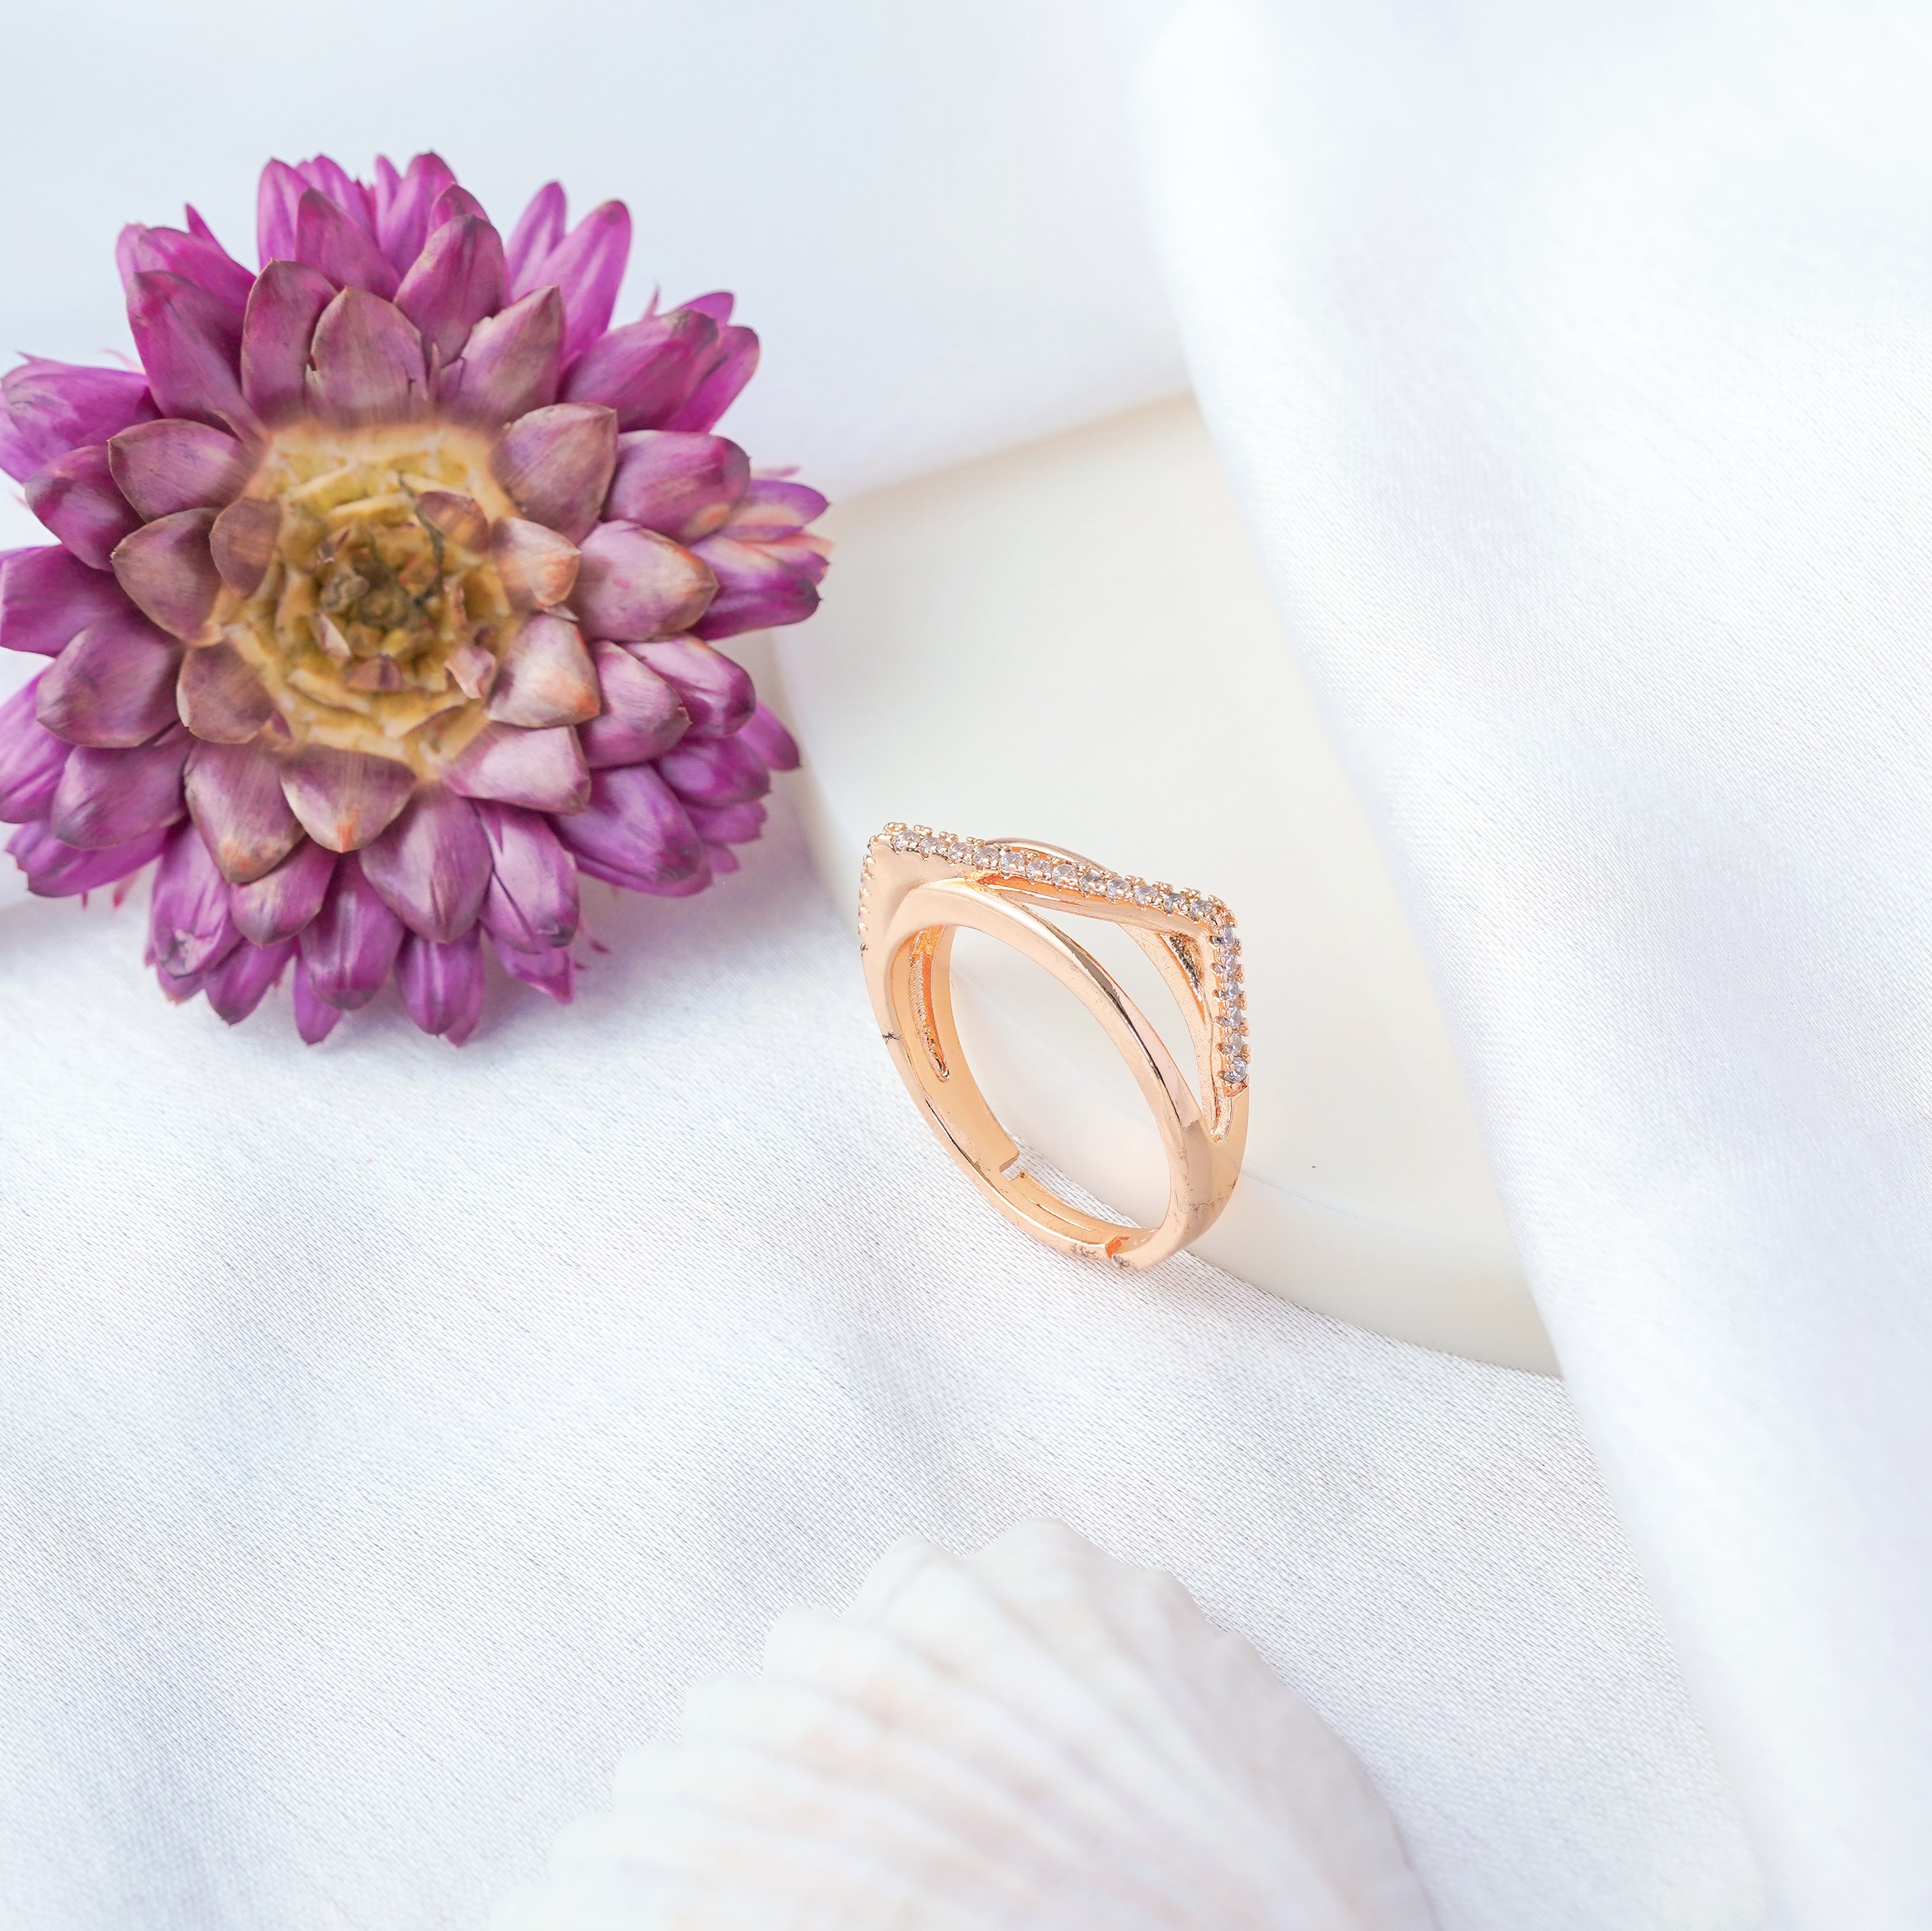 Jewelsium Rose Gold Designer Ring: Exquisite Beauty, Unmatched Brilliance